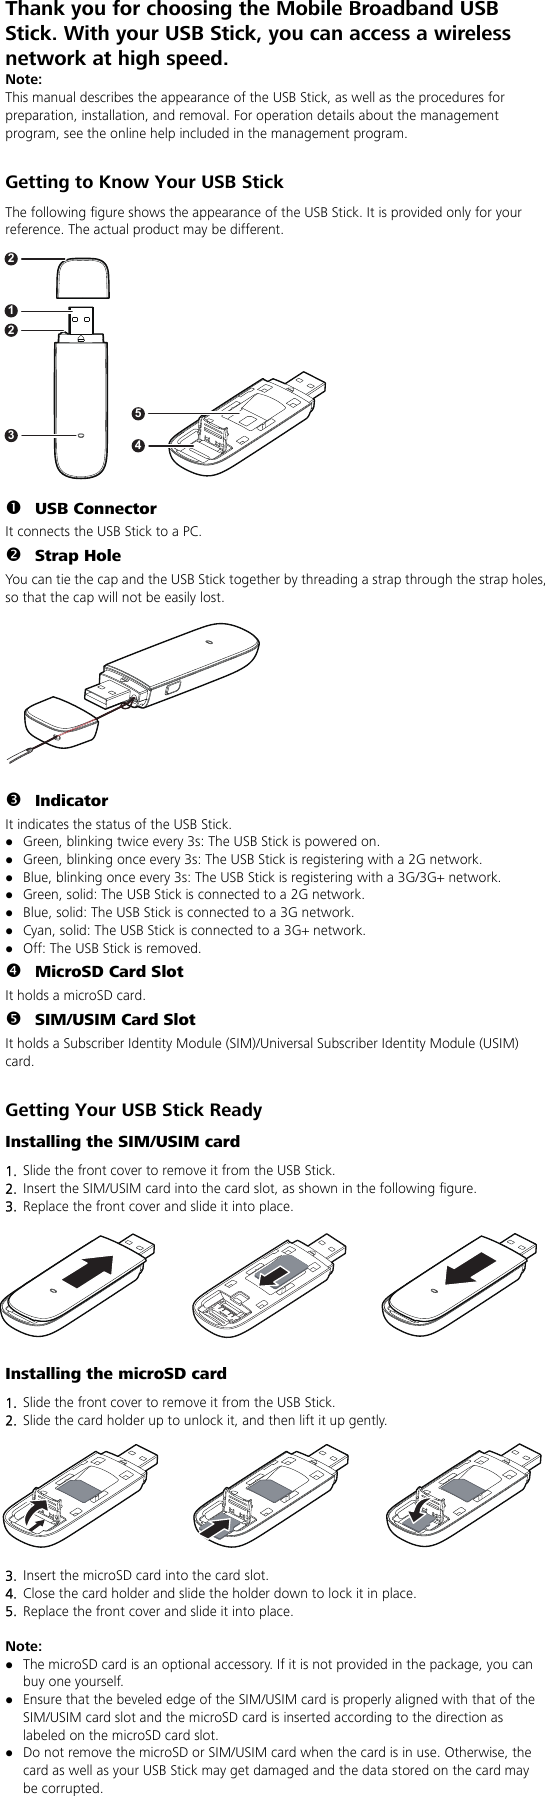 Thank you for choosing the Mobile Broadband USB Stick. With your USB Stick, you can access a wireless network at high speed.   Note: This manual describes the appearance of the USB Stick, as well as the procedures for preparation, installation, and removal. For operation details about the management program, see the online help included in the management program.  Getting to Know Your USB Stick The following figure shows the appearance of the USB Stick. It is provided only for your reference. The actual product may be different.  n USB Connector It connects the USB Stick to a PC. o Strap Hole You can tie the cap and the USB Stick together by threading a strap through the strap holes, so that the cap will not be easily lost.  p Indicator It indicates the status of the USB Stick. z Green, blinking twice every 3s: The USB Stick is powered on. z Green, blinking once every 3s: The USB Stick is registering with a 2G network. z Blue, blinking once every 3s: The USB Stick is registering with a 3G/3G+ network. z Green, solid: The USB Stick is connected to a 2G network. z Blue, solid: The USB Stick is connected to a 3G network. z Cyan, solid: The USB Stick is connected to a 3G+ network. z Off: The USB Stick is removed. q MicroSD Card Slot It holds a microSD card.   r SIM/USIM Card Slot It holds a Subscriber Identity Module (SIM)/Universal Subscriber Identity Module (USIM) card.  Getting Your USB Stick Ready Installing the SIM/USIM card 1.  Slide the front cover to remove it from the USB Stick.   2.  Insert the SIM/USIM card into the card slot, as shown in the following figure.   3.  Replace the front cover and slide it into place. Installing the microSD card 1.  Slide the front cover to remove it from the USB Stick. 2.  Slide the card holder up to unlock it, and then lift it up gently.  3.  Insert the microSD card into the card slot. 4.  Close the card holder and slide the holder down to lock it in place.   5.  Replace the front cover and slide it into place.  Note:  z The microSD card is an optional accessory. If it is not provided in the package, you can buy one yourself. z Ensure that the beveled edge of the SIM/USIM card is properly aligned with that of the SIM/USIM card slot and the microSD card is inserted according to the direction as labeled on the microSD card slot. z Do not remove the microSD or SIM/USIM card when the card is in use. Otherwise, the card as well as your USB Stick may get damaged and the data stored on the card may be corrupted. 231245